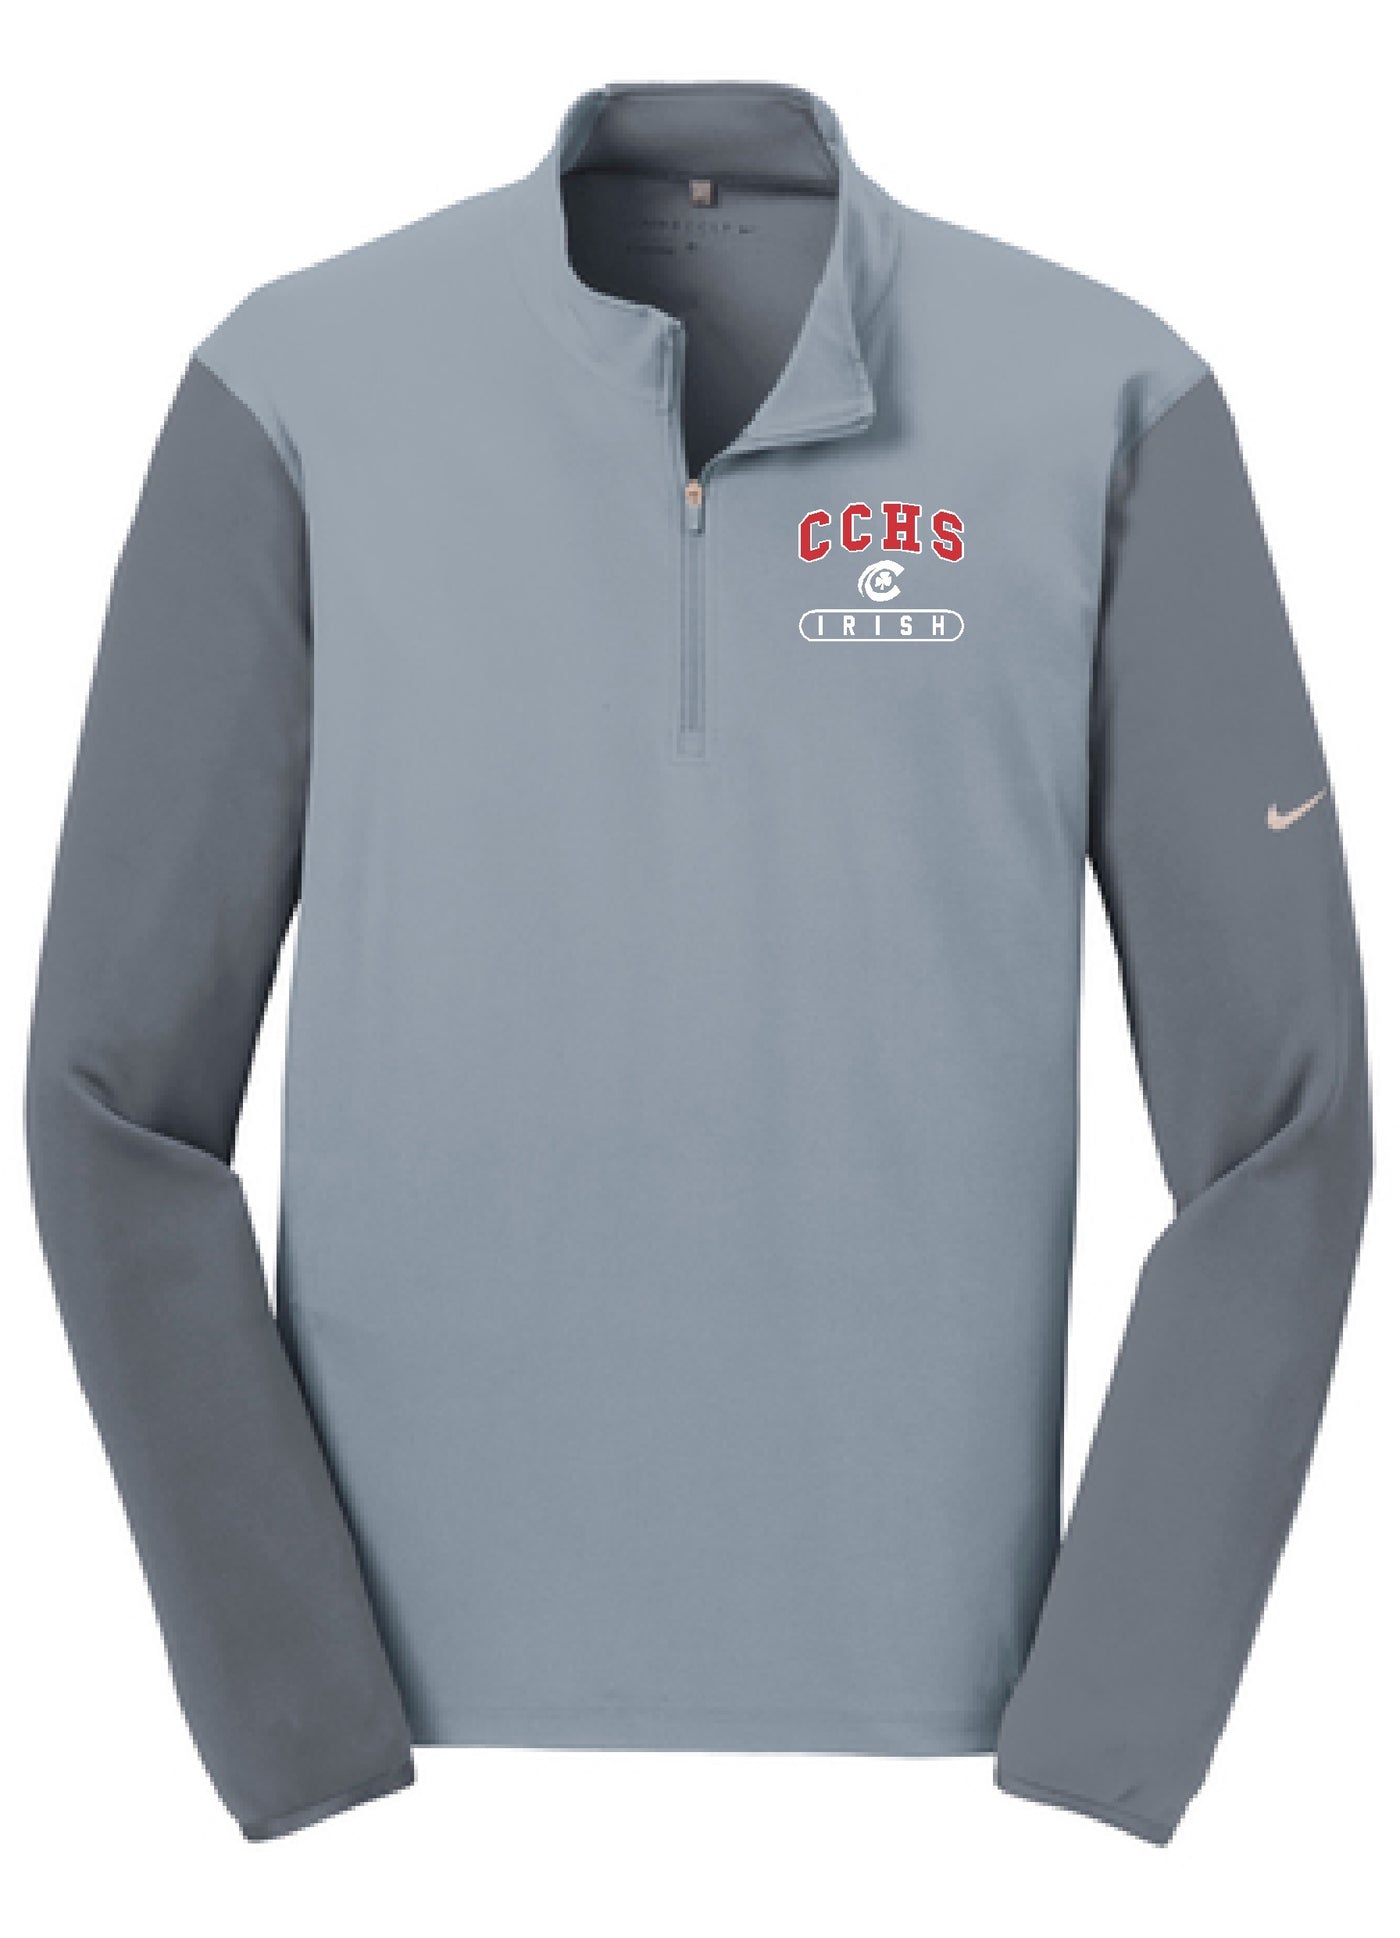 CCHS Nike Dri-FIT Fabric Mix 1/2-Zip Cover-Up